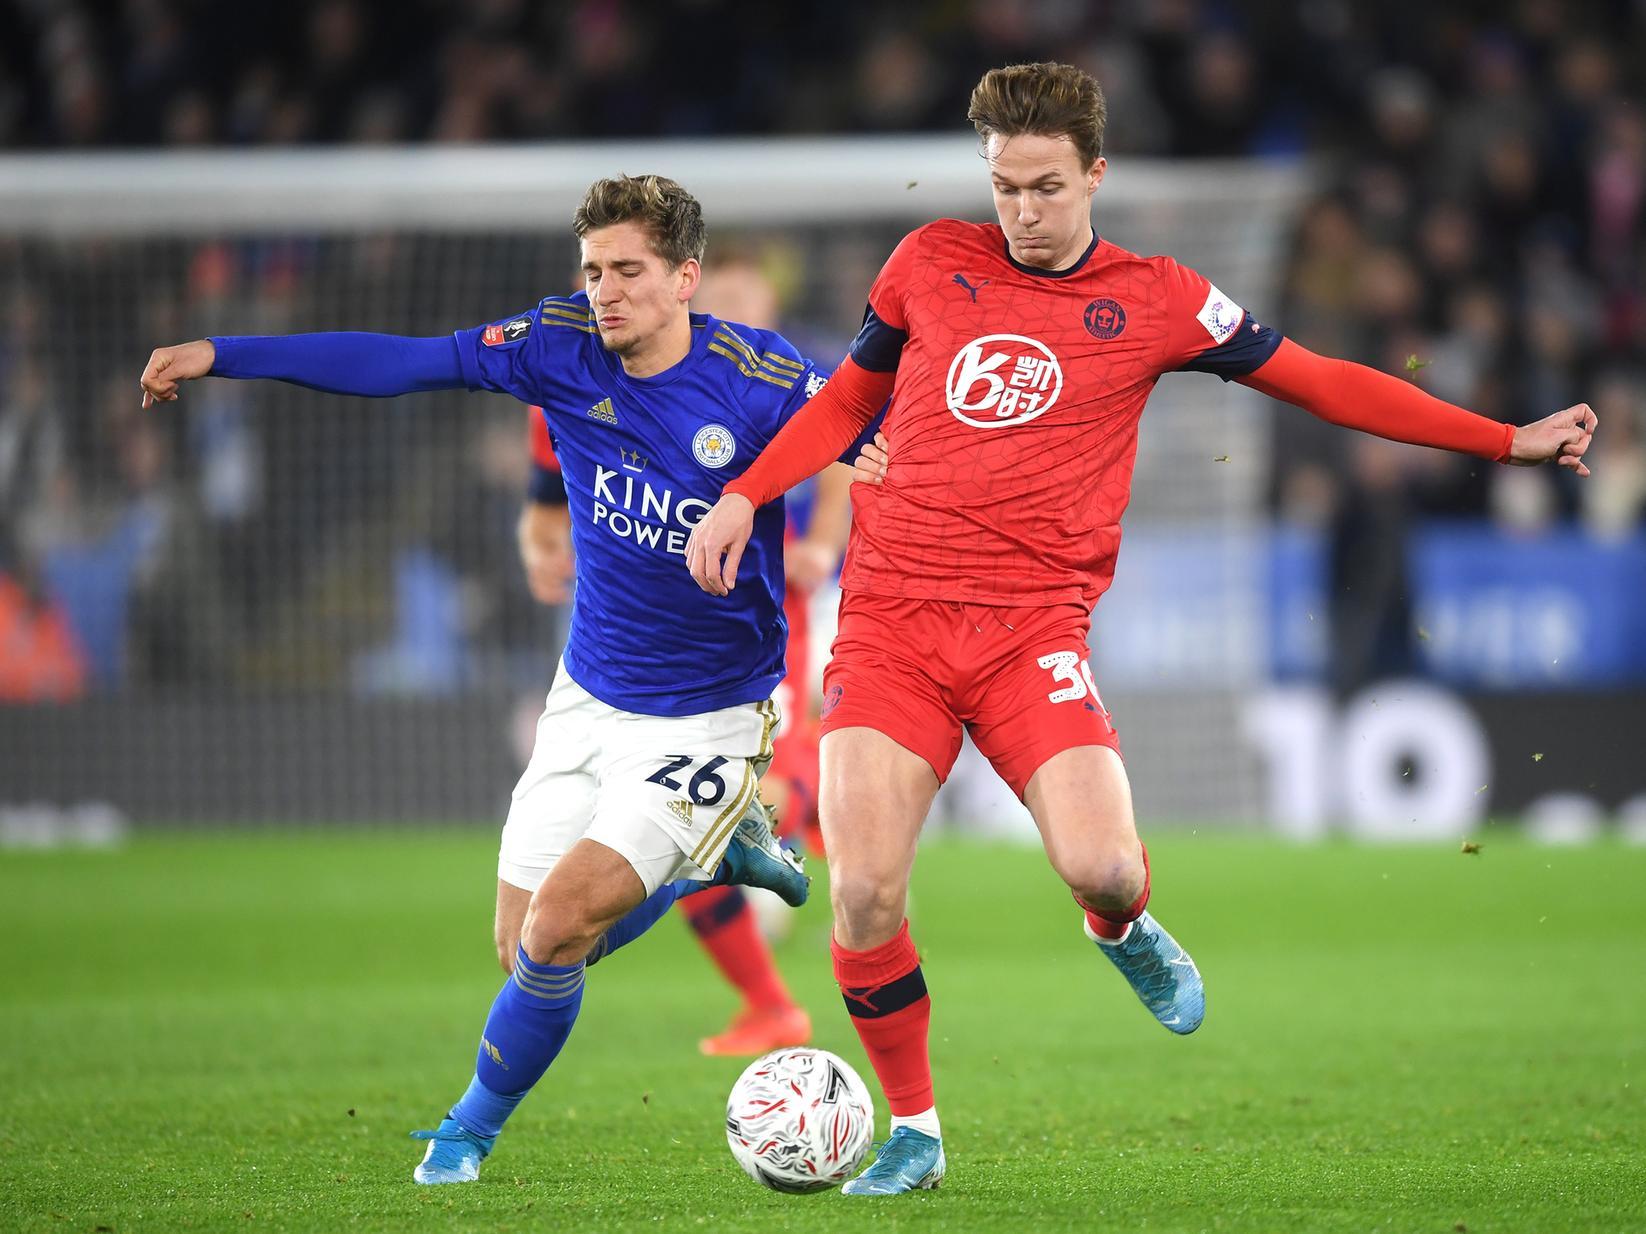 Everton midfielder cut short his loan deal at Derby to move to Wigan on loan until the end of the season. Former England U21 international has made four starts for the Latics so far.